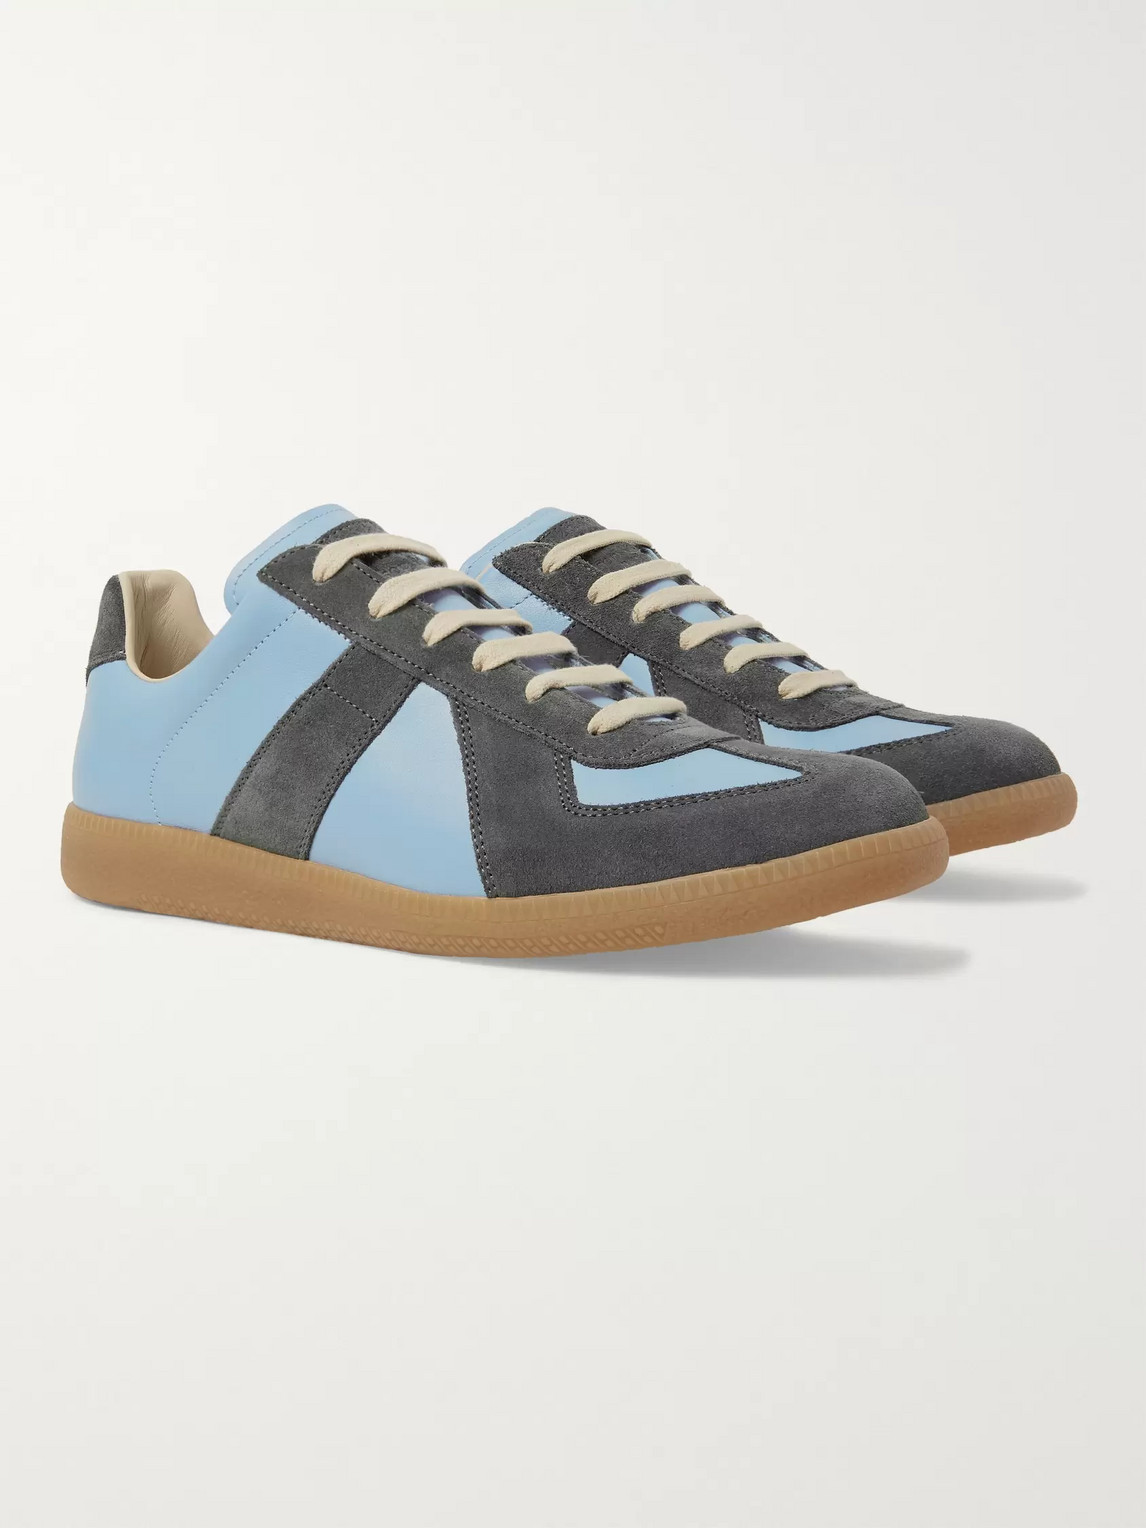 MAISON MARGIELA REPLICA LEATHER AND SUEDE SNEAKERS